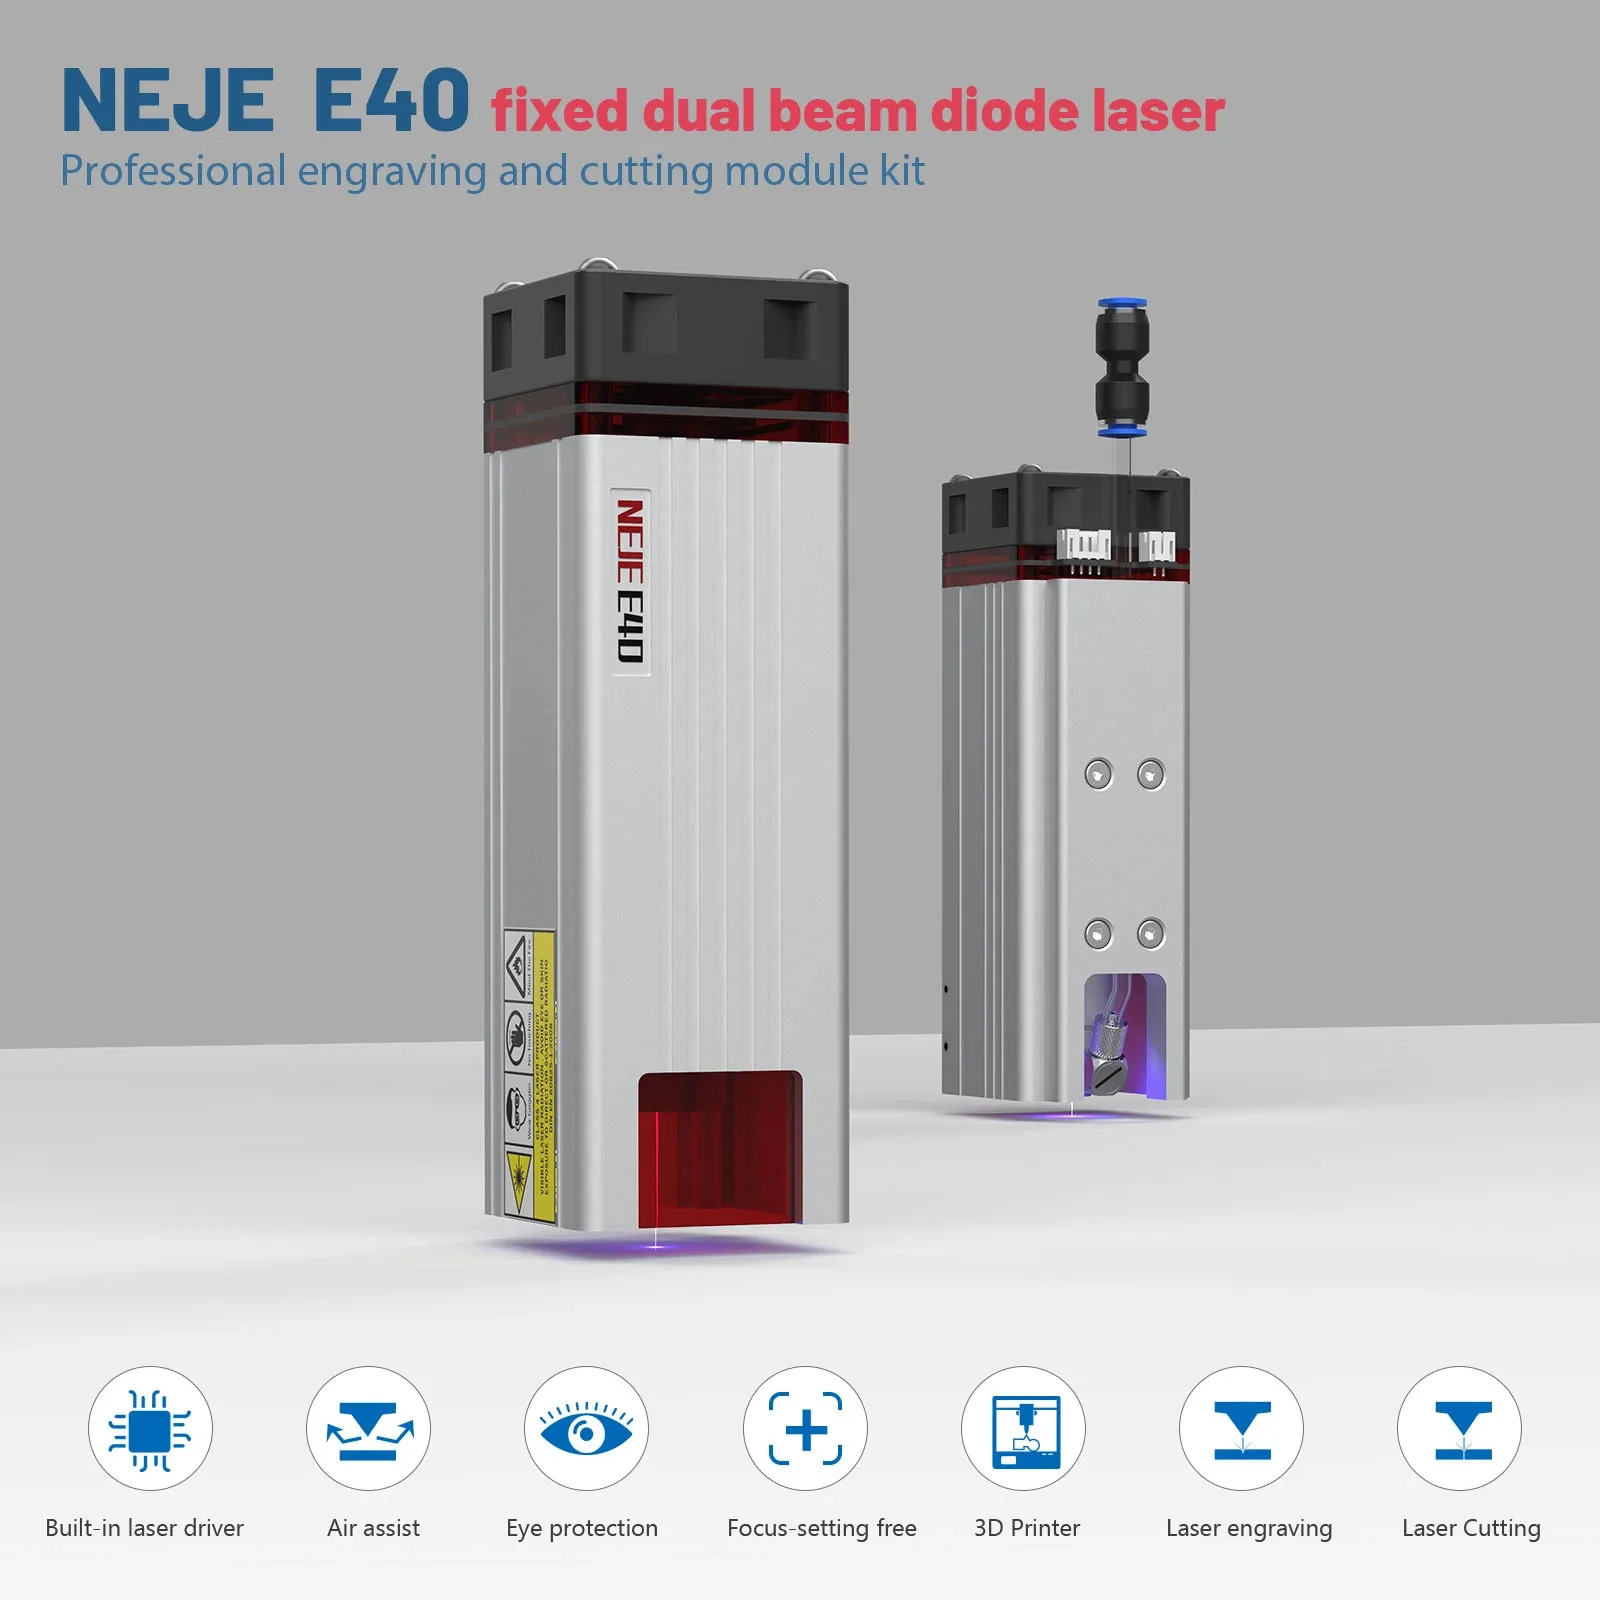 NEJE E40 FIXED-FOCUS LASER MODULE FOR CUTTING AND CARVING - 11W+ OUTPUT - 2 BEAM - BUILT-IN HIGH PRESSURE AIR ASSIST enlarge